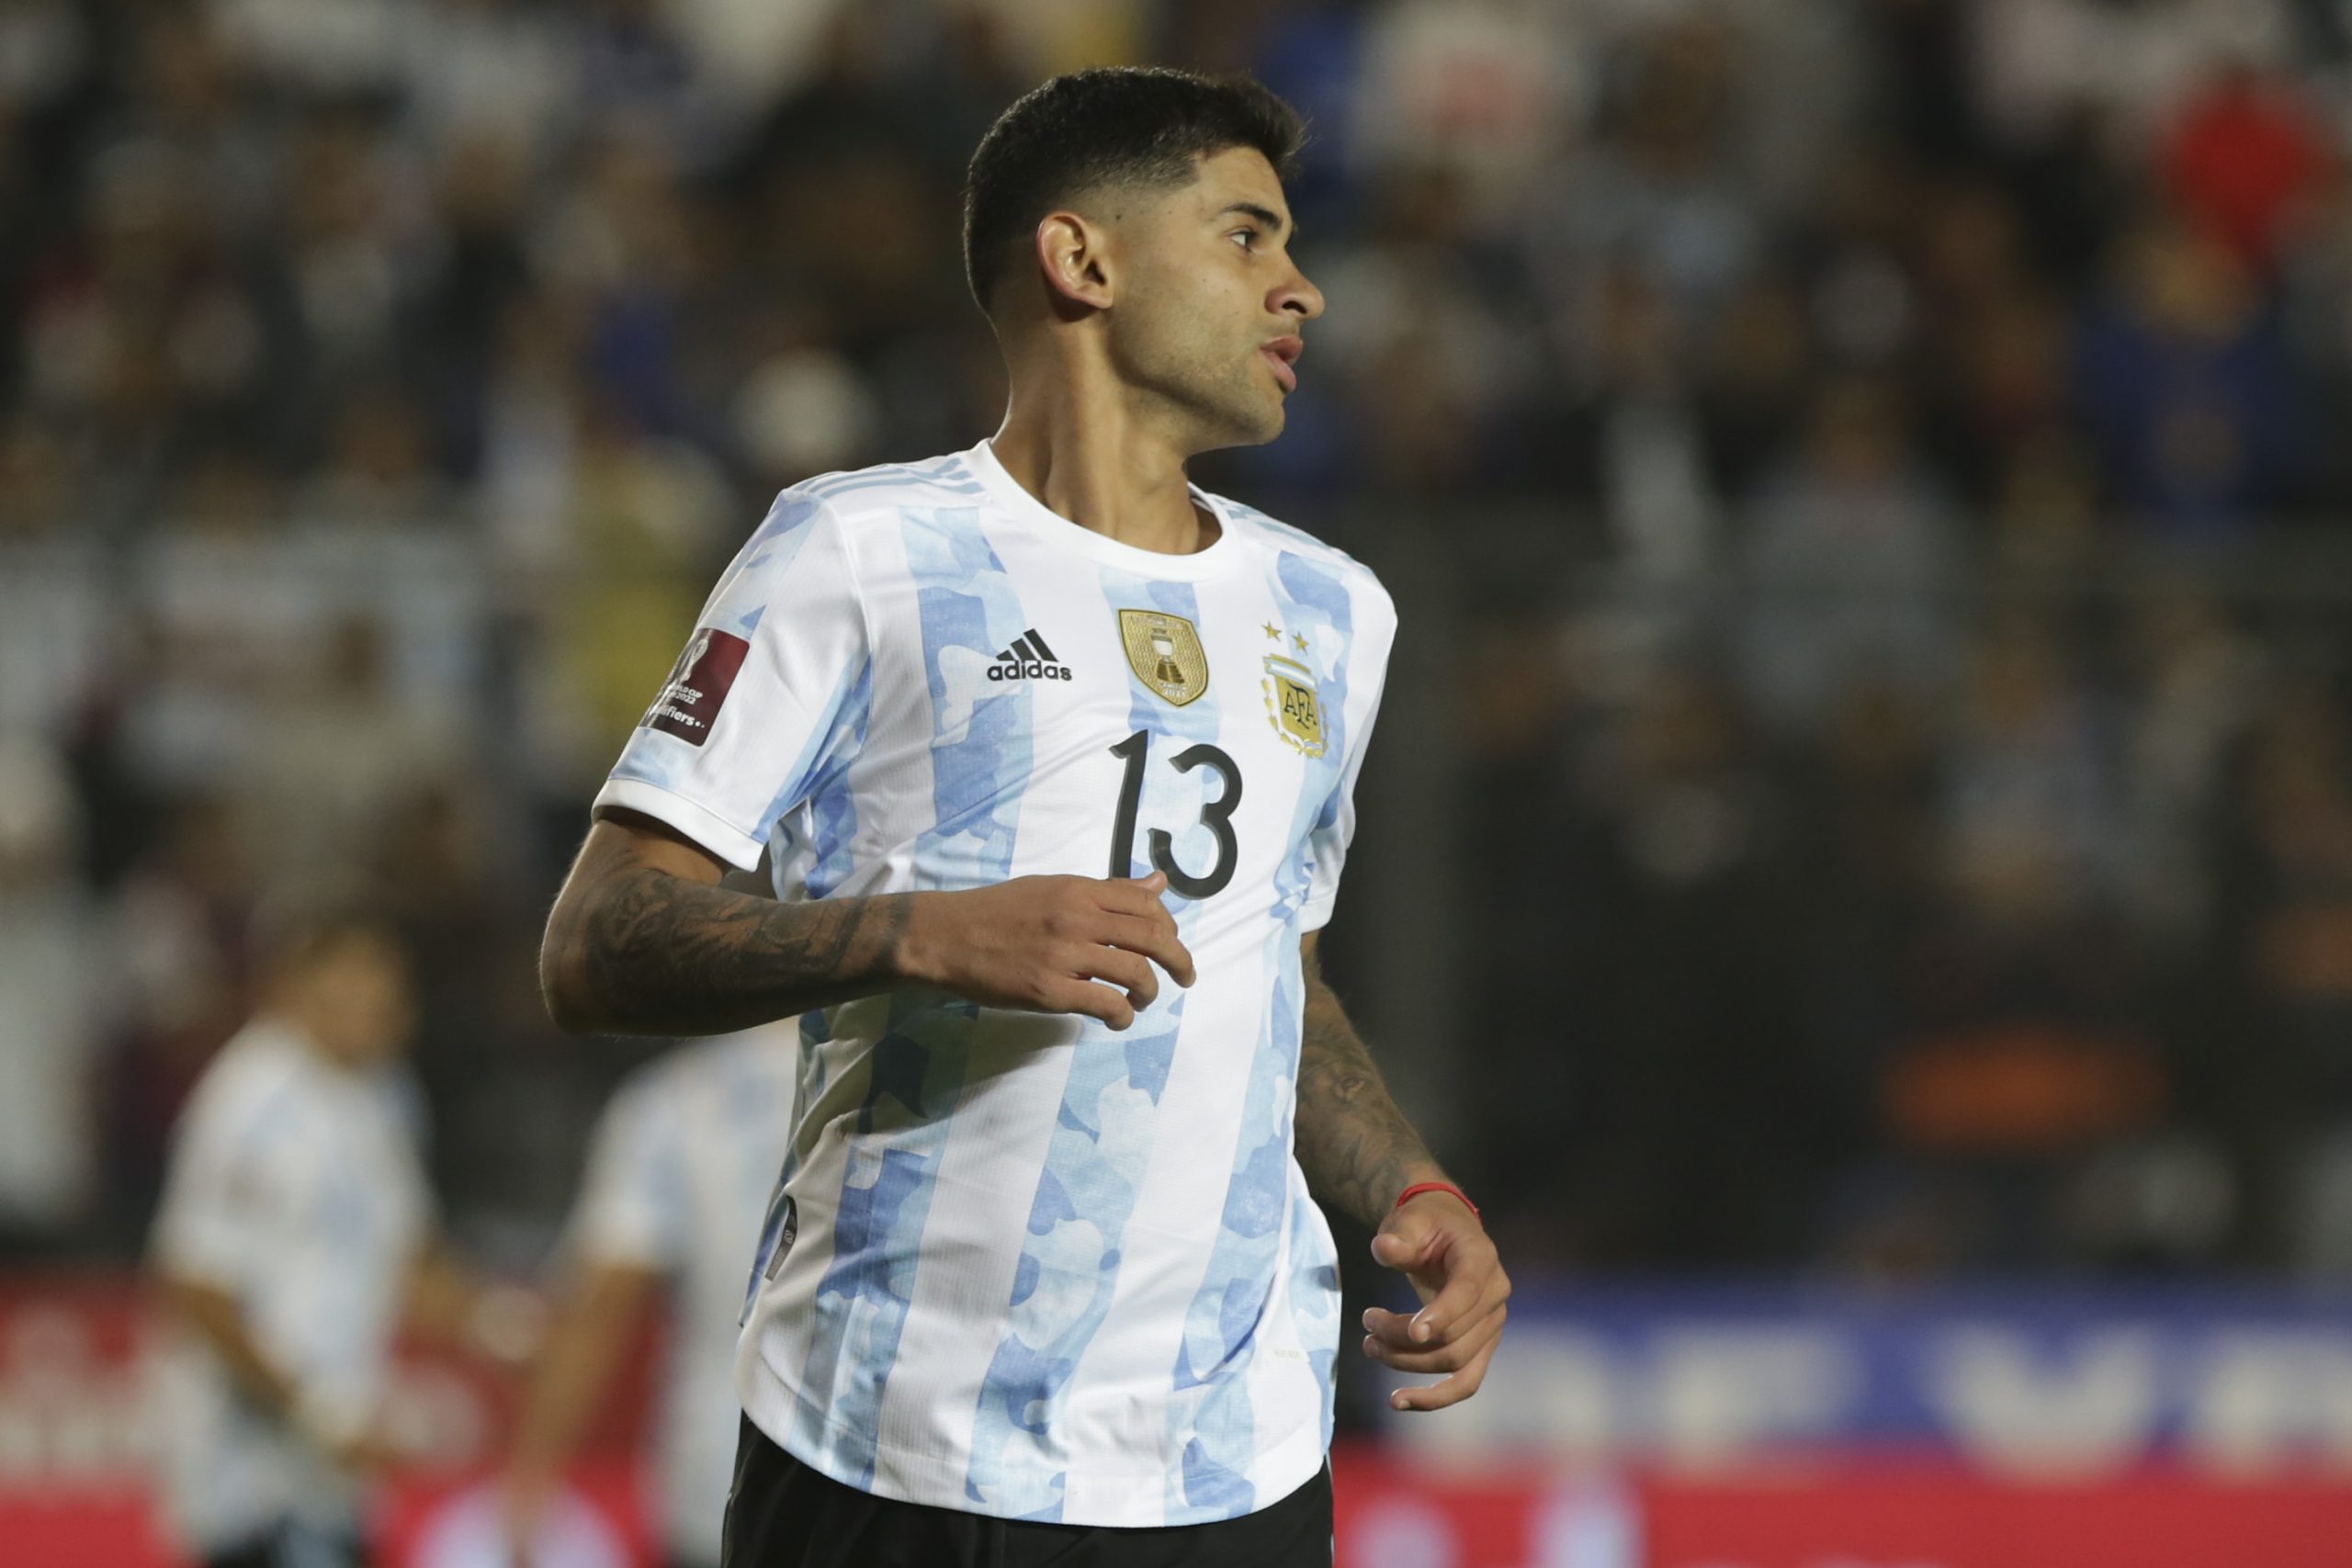 Tottenham Hotspur reject a request from Argentina FA to rest players before World Cup.